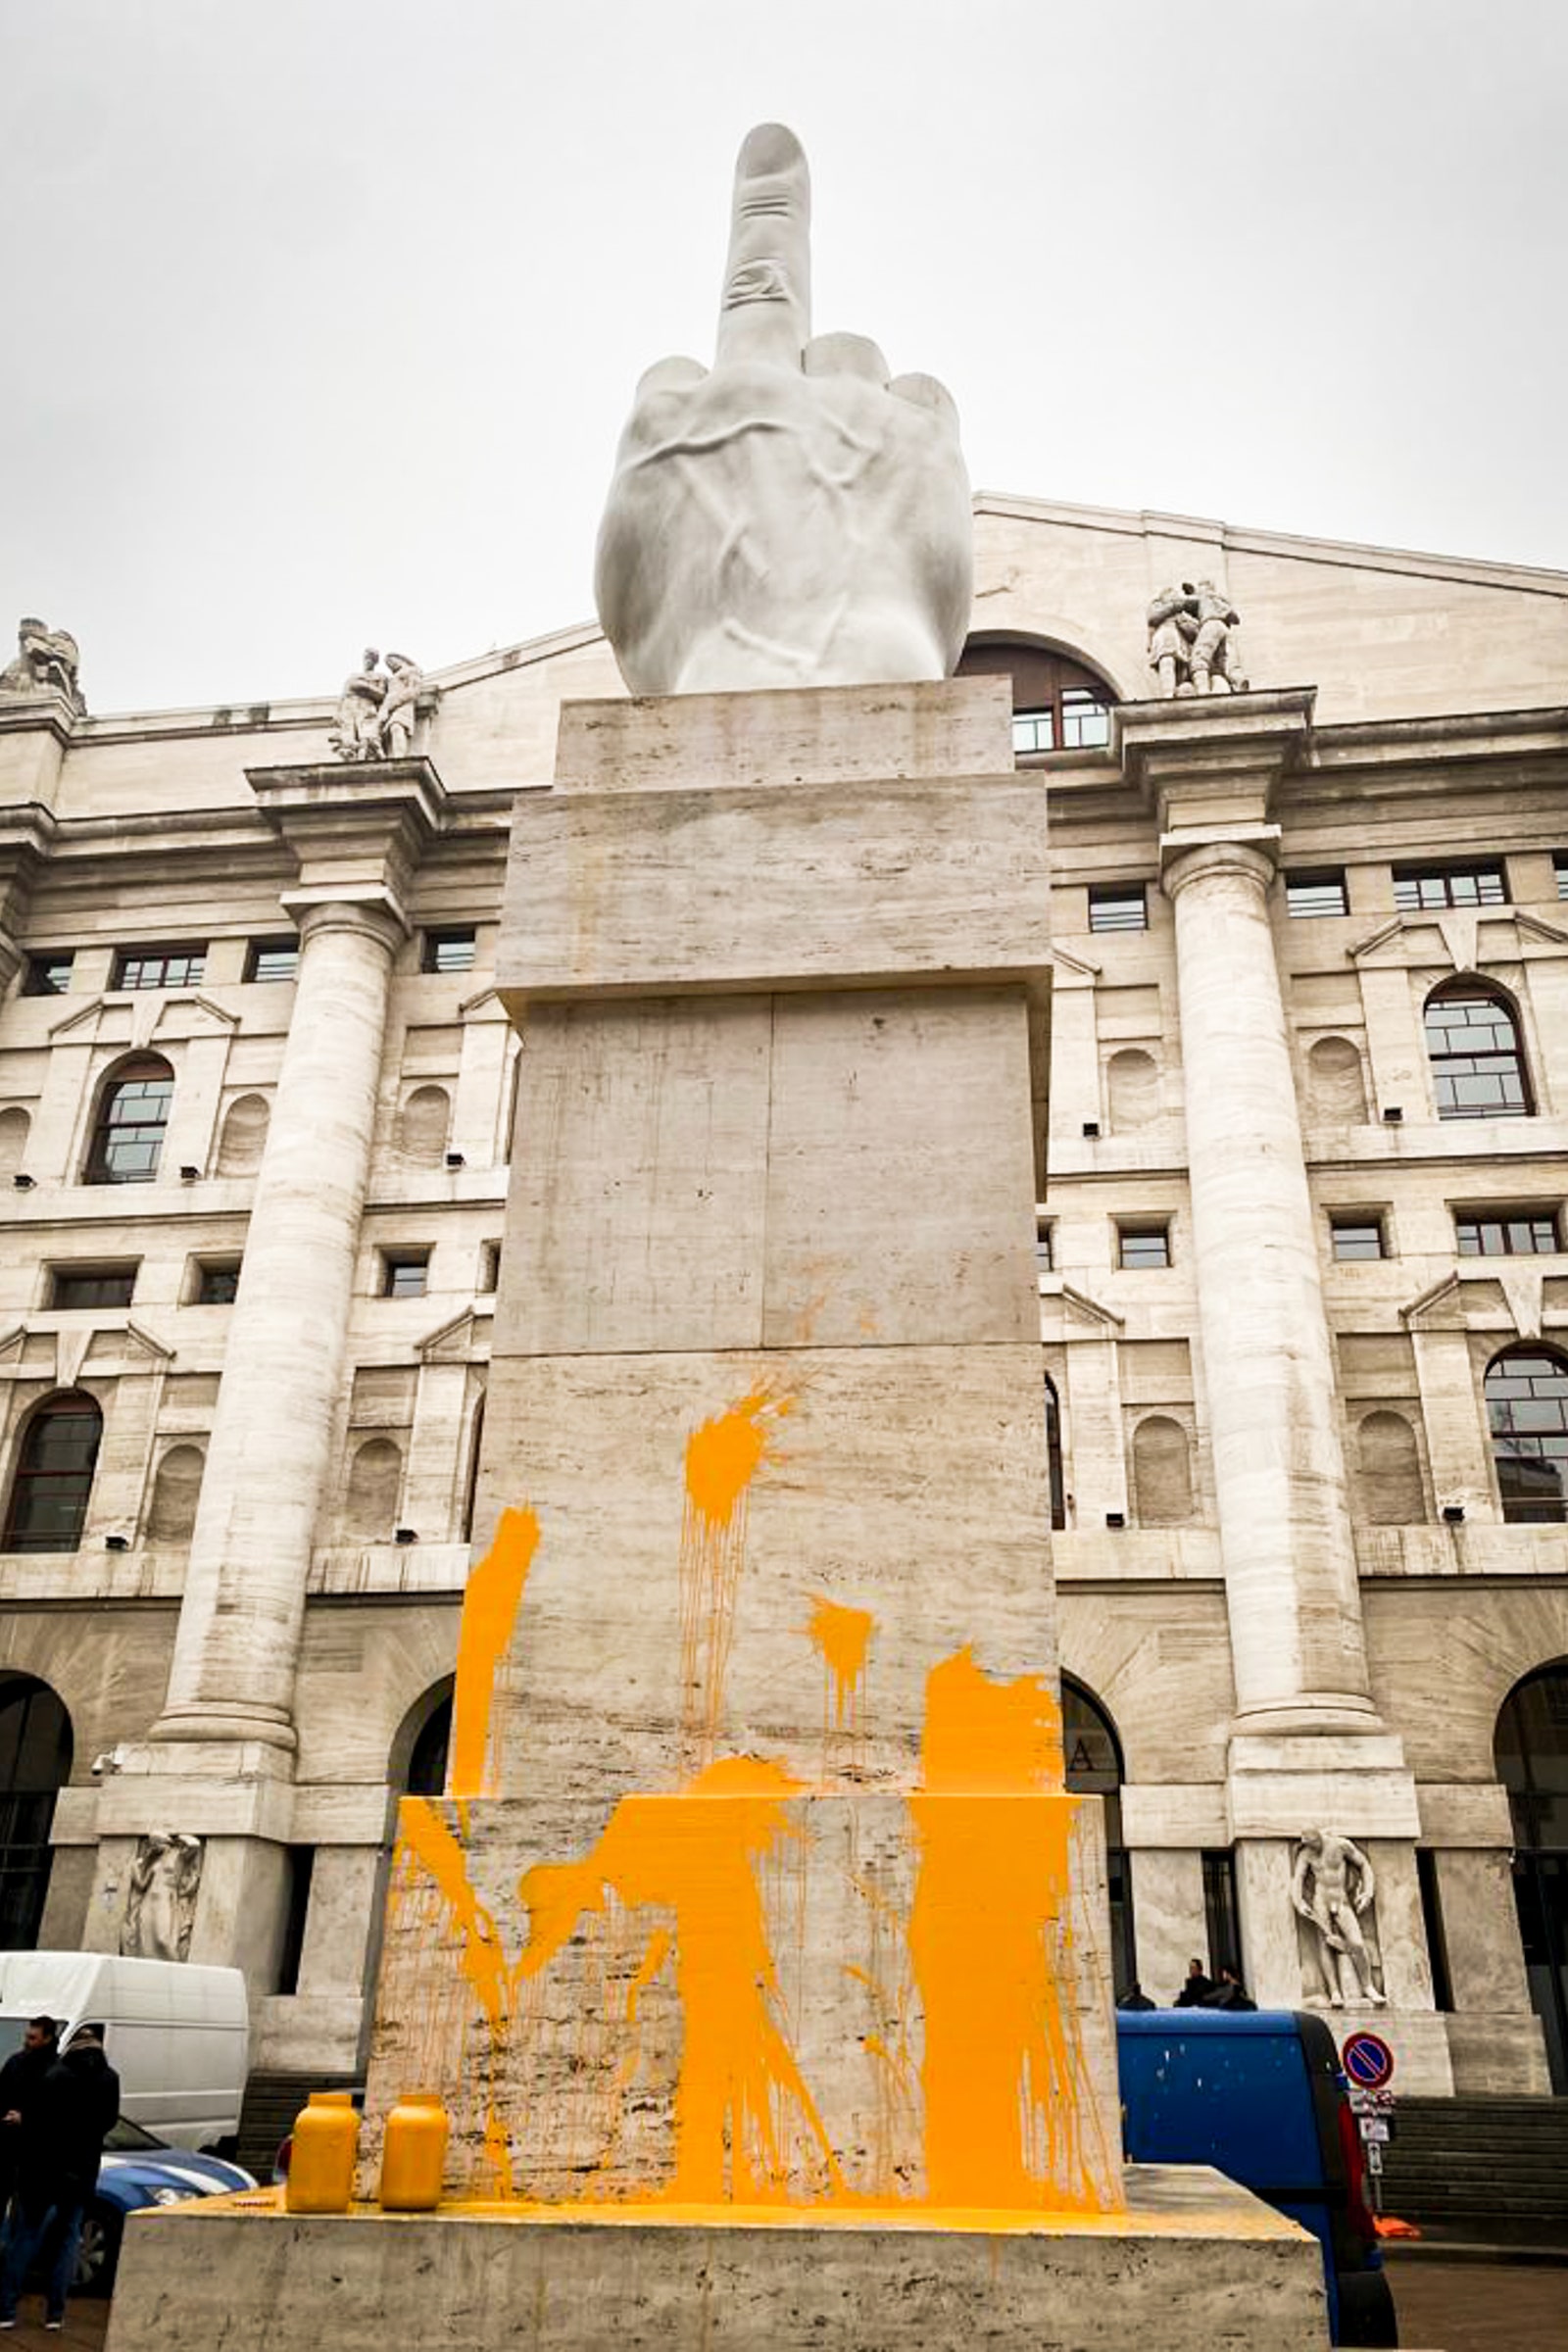 The latest blitz Maurizio Cattelan's opera Love better known as Il Dito in Piazza Affari in Milan was taken by...